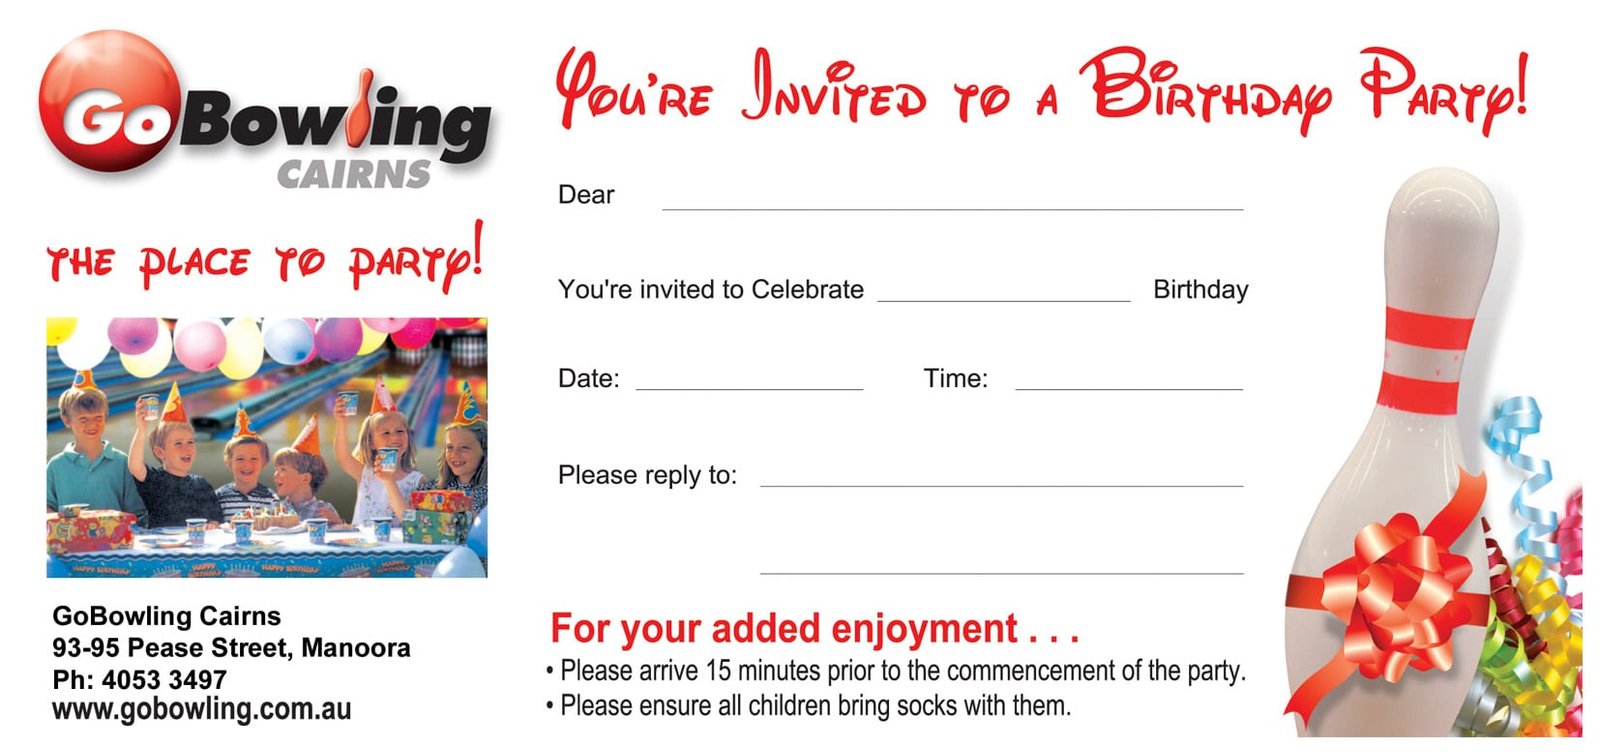 Ten Pin Bowling Party Invitation Template